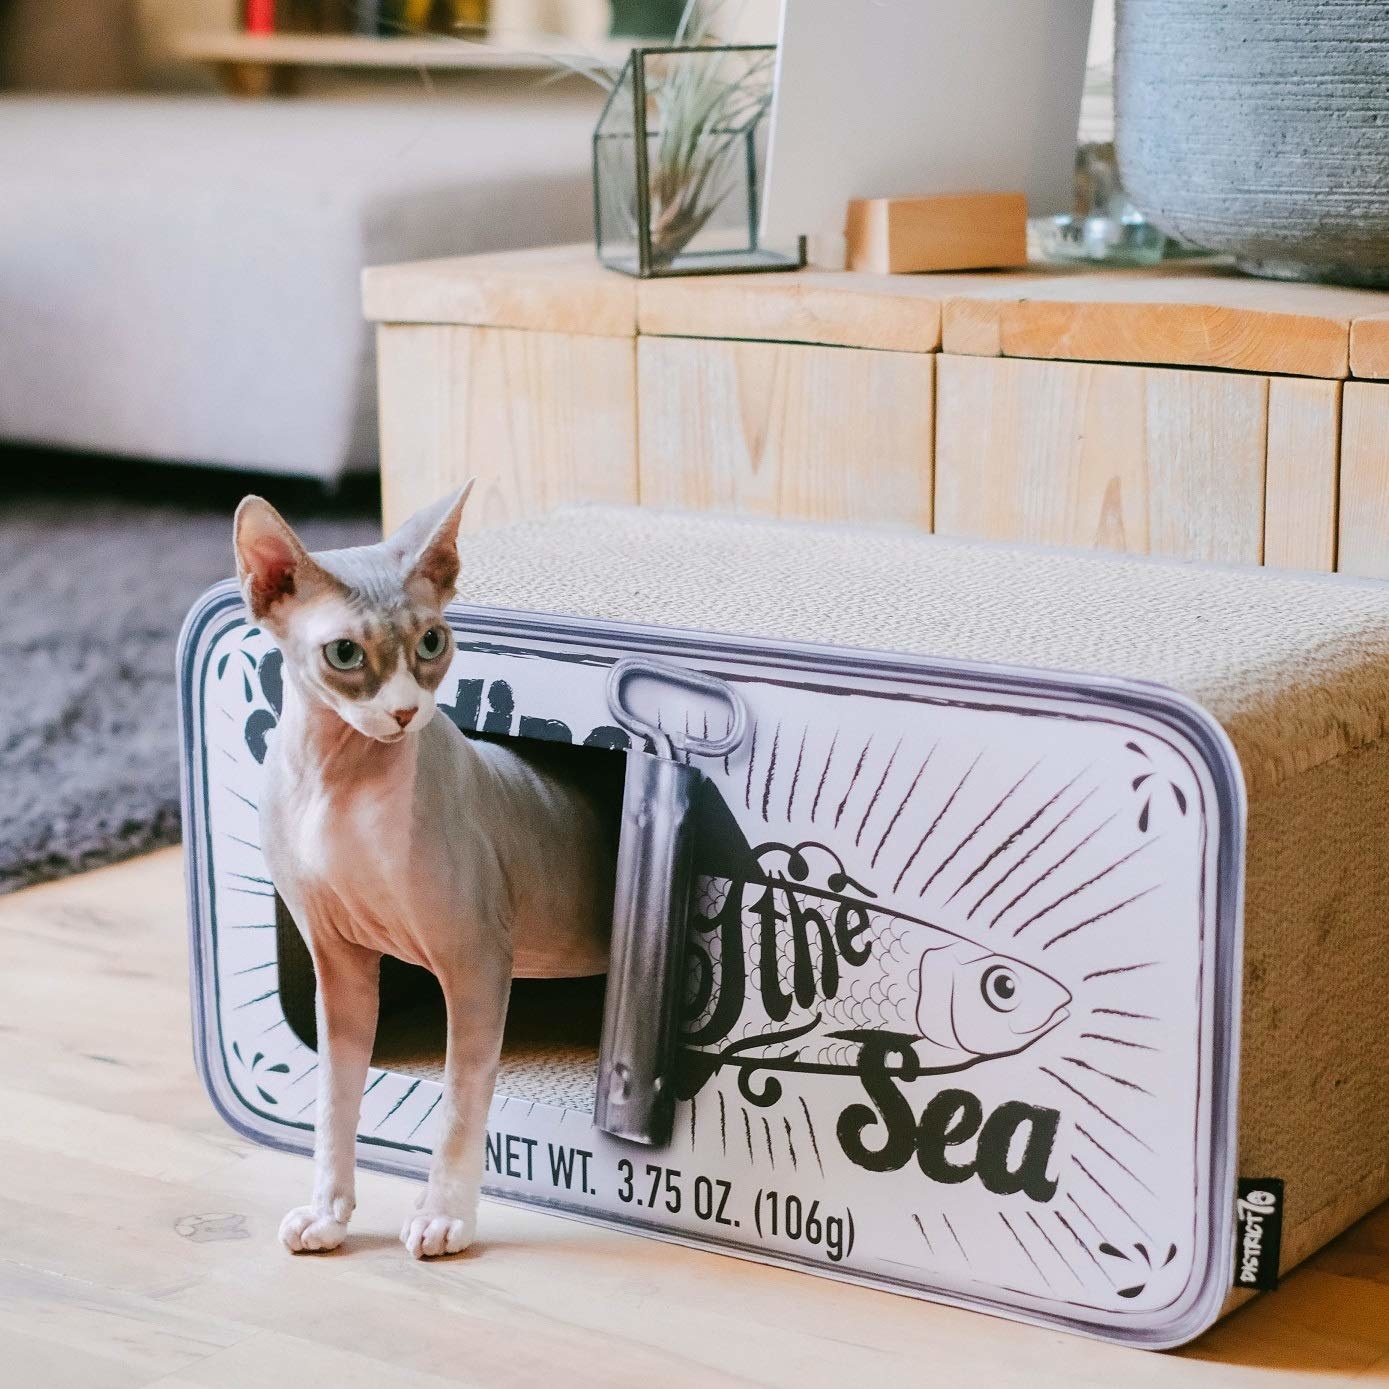 Hairless cat walking out of rectangular cat bed designed to look like opened can of sardines 